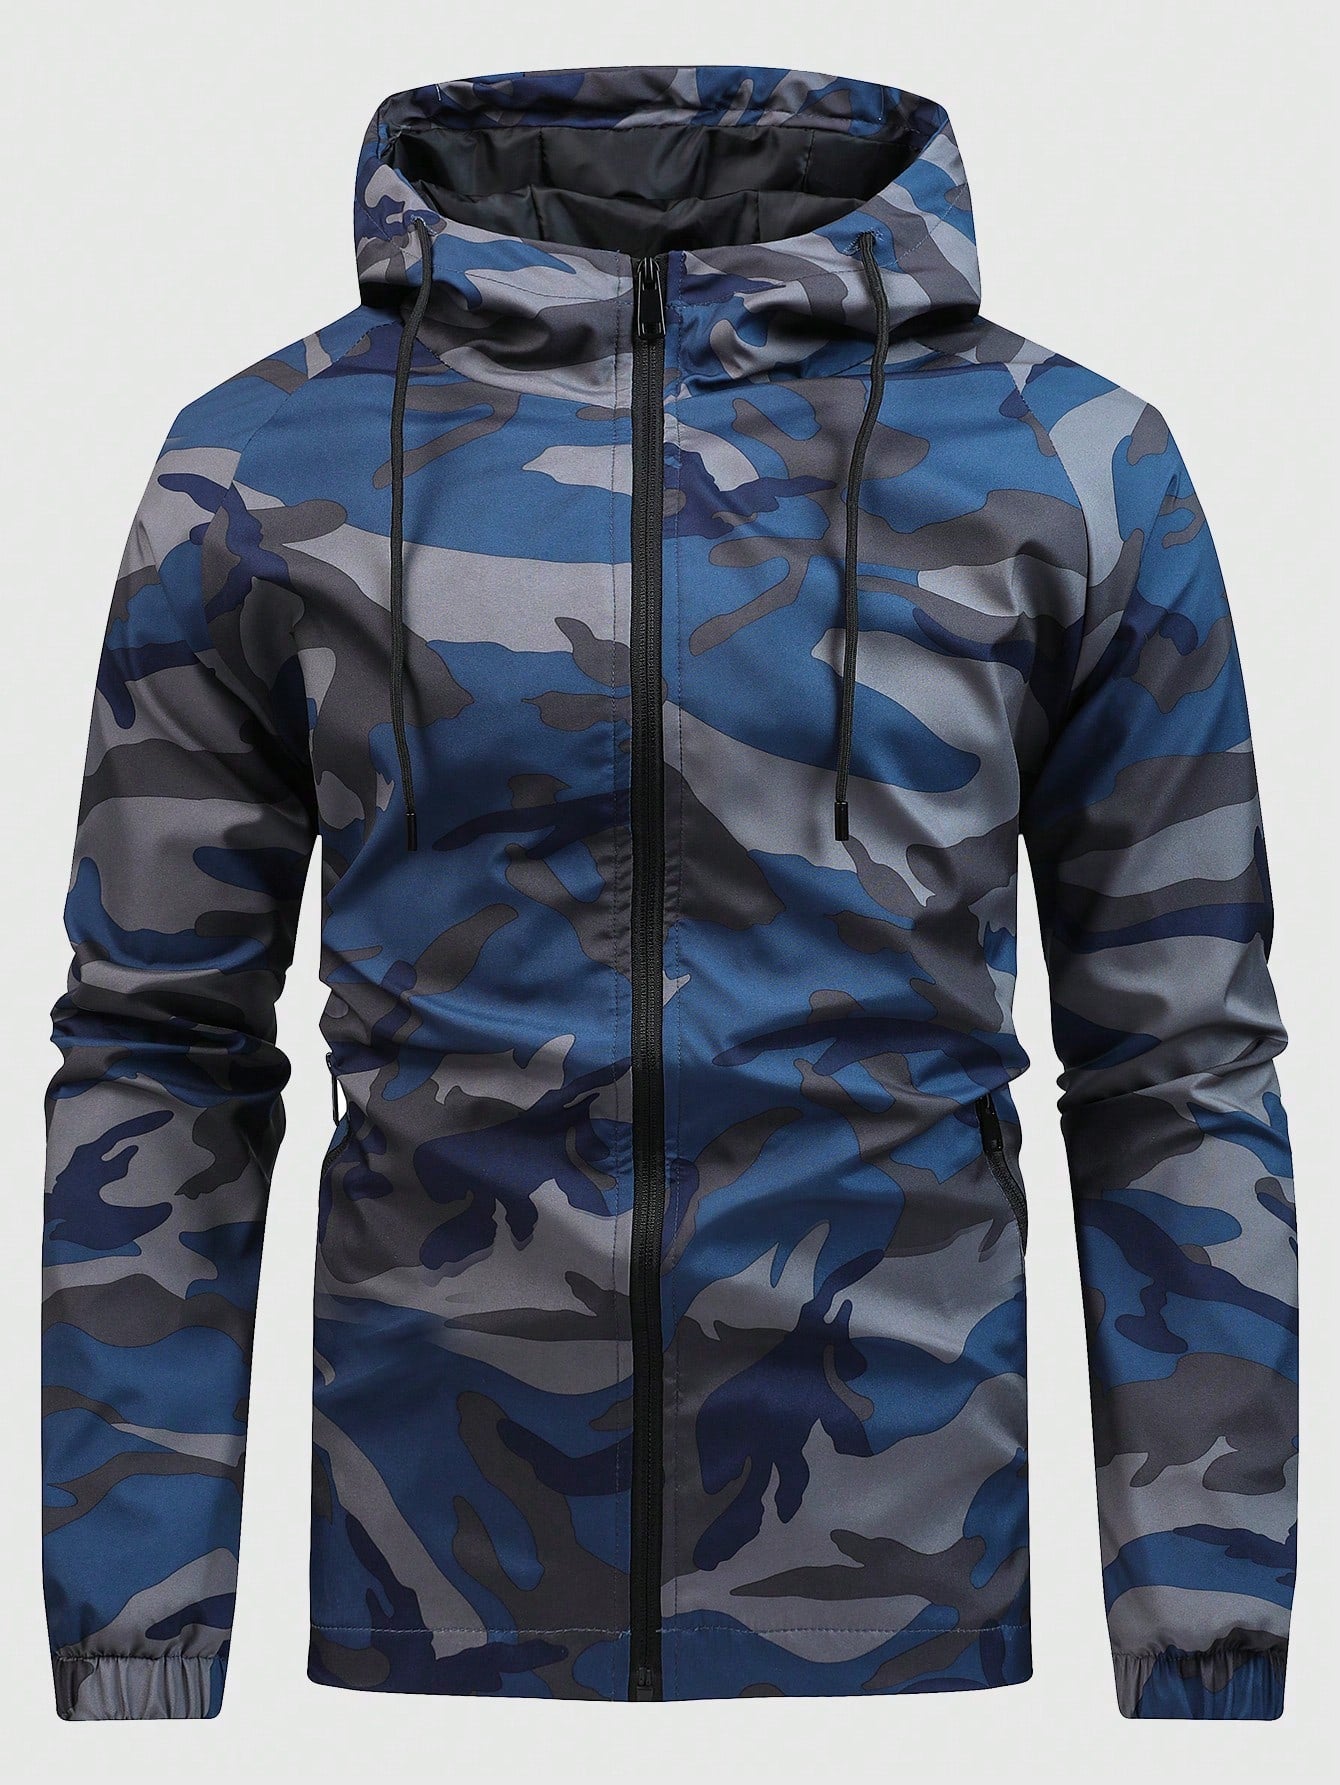 Men's Camouflage Zipper Front Drawstring Hooded Athletic Jacket Workout Tops